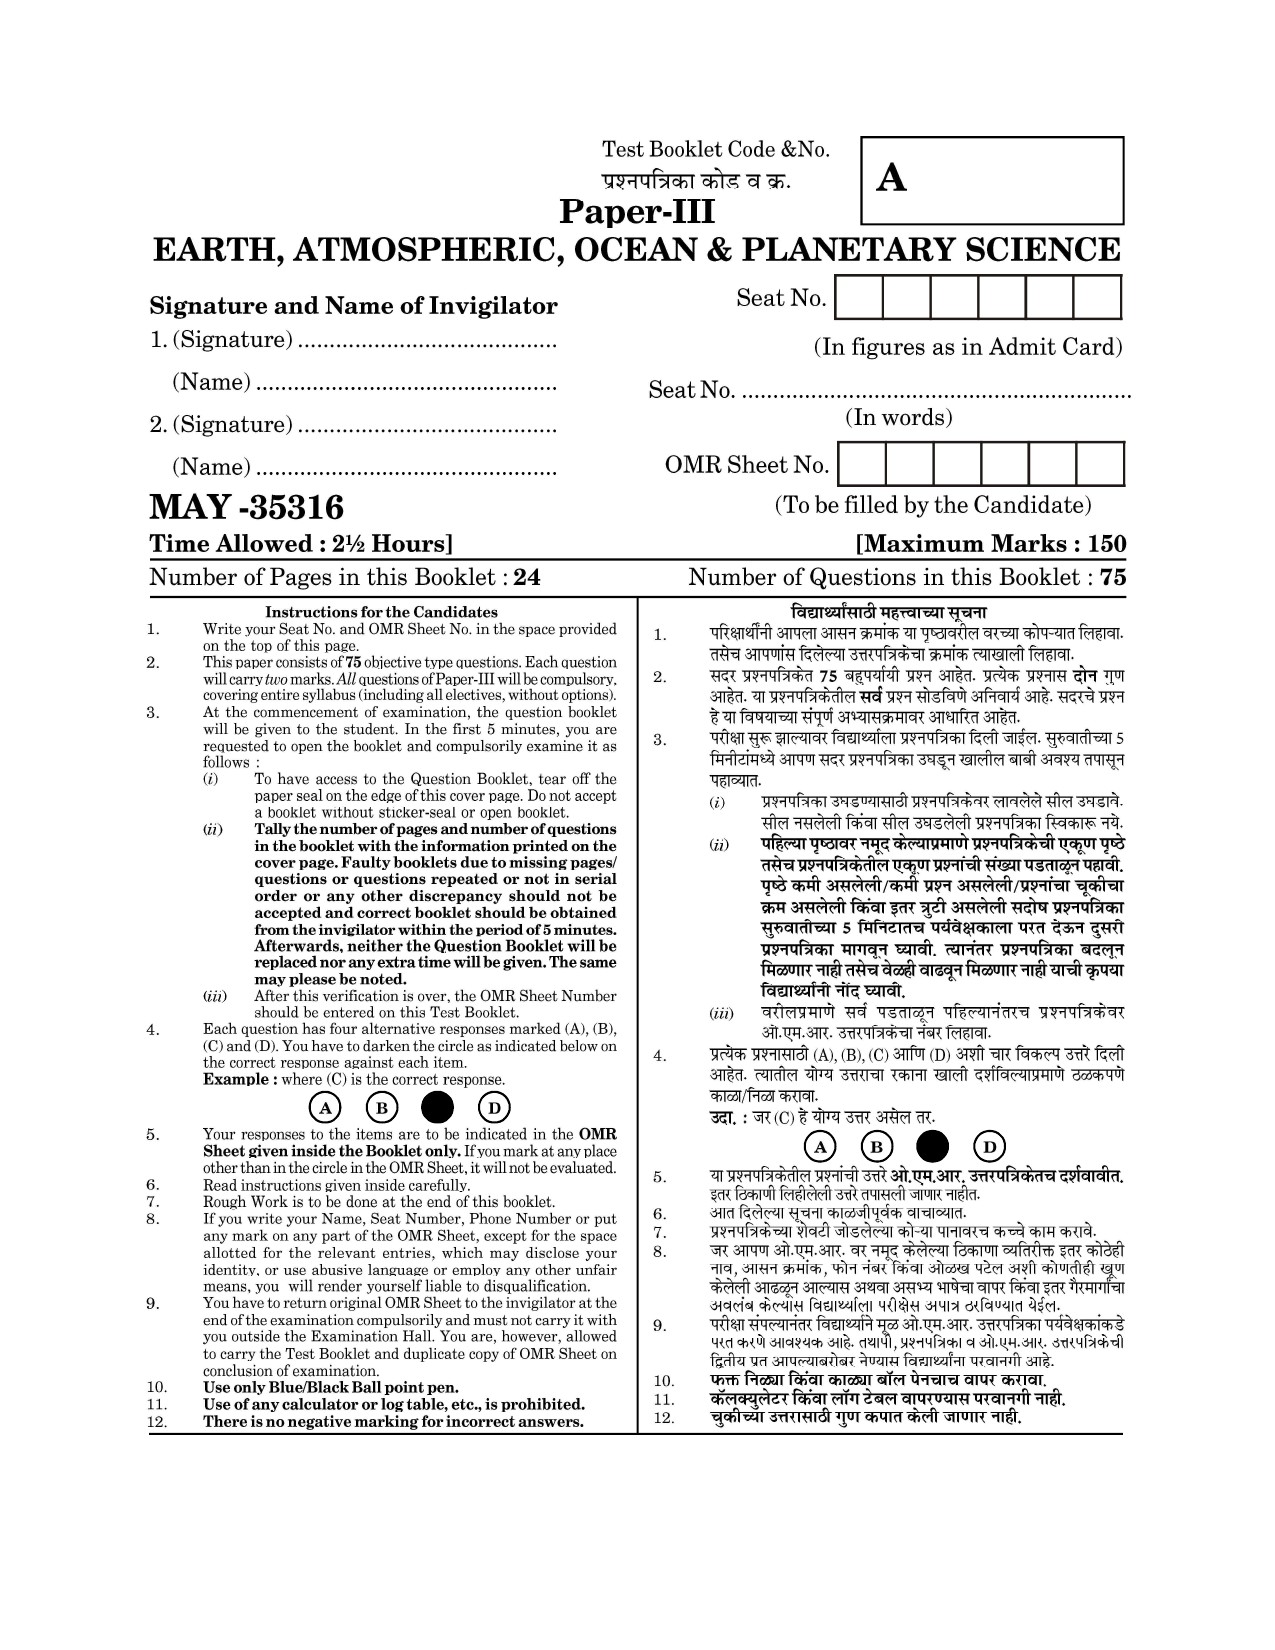 Maharashtra SET Earth Atmospheric Ocean Planetary Science Question Paper III May 2016 1